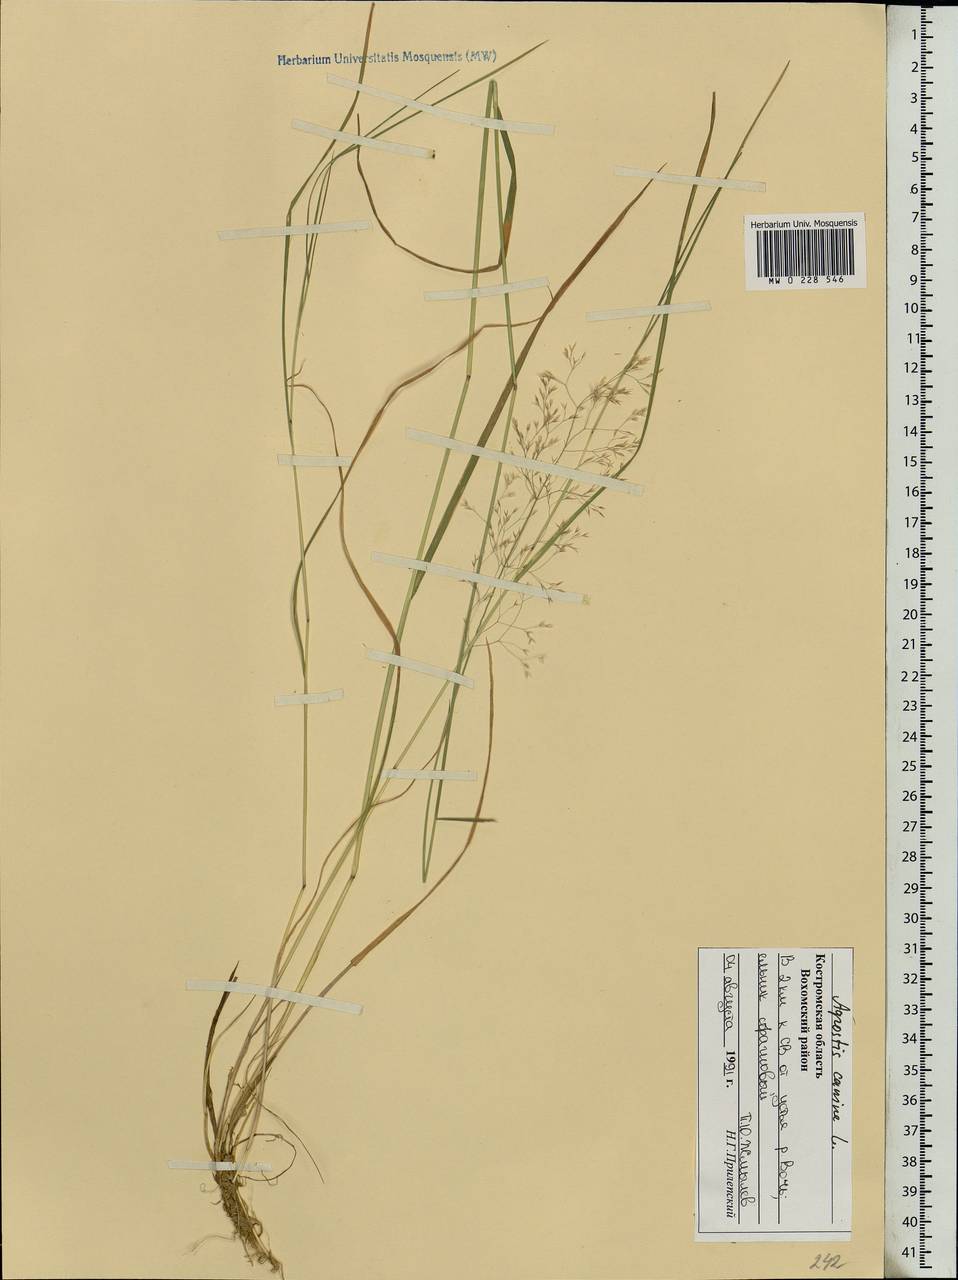 Agrostis canina L., Eastern Europe, Central forest region (E5) (Russia)